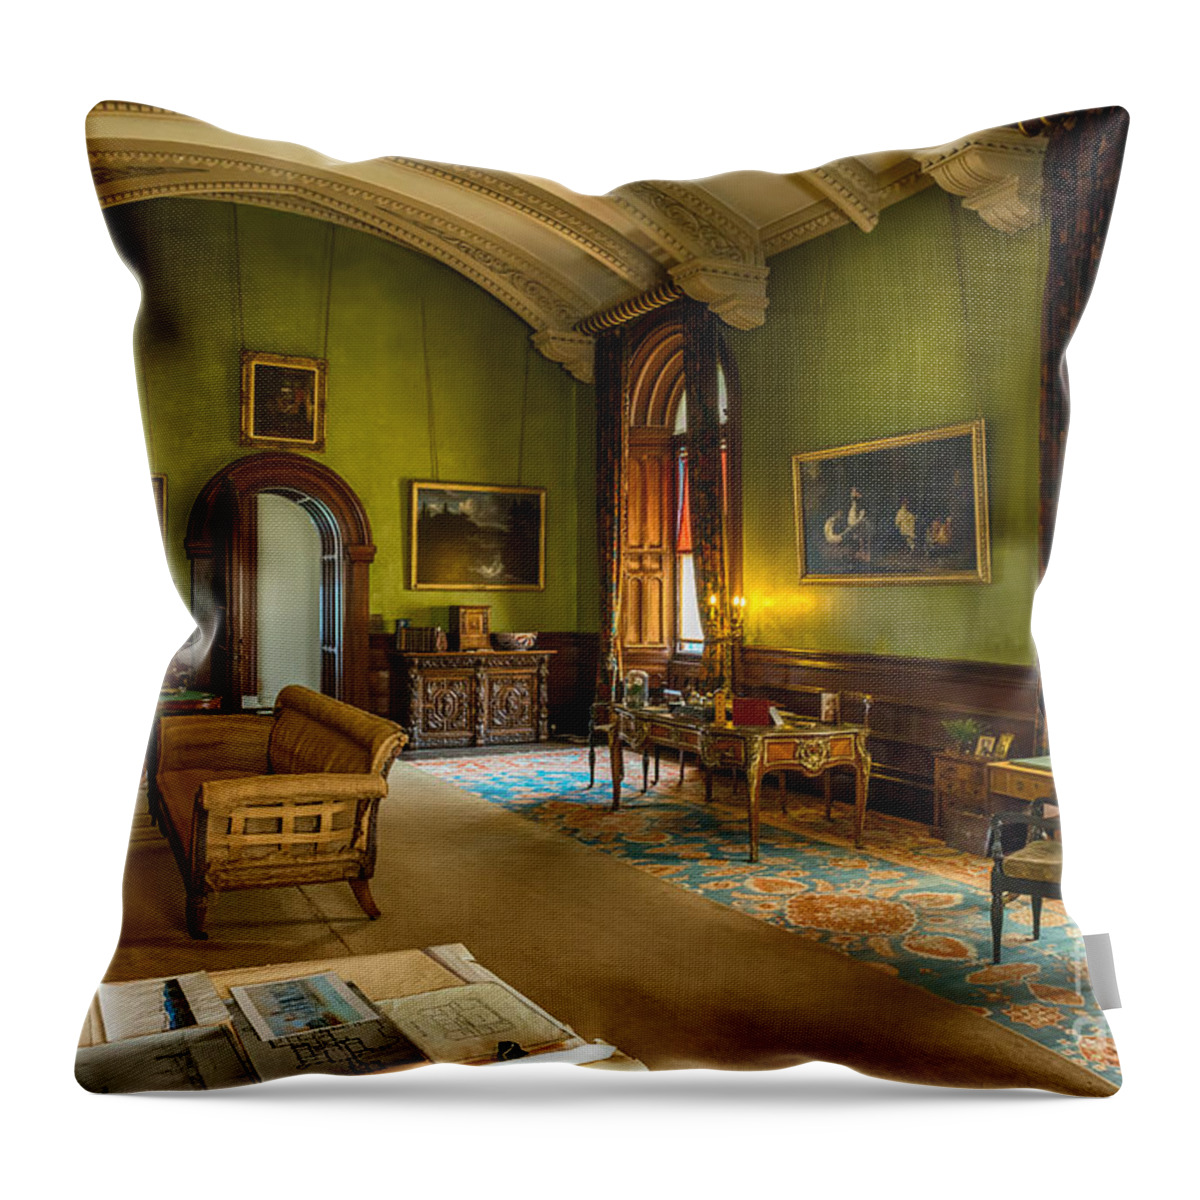 Mansion Lounge Throw Pillow featuring the photograph Mansion Lounge by Adrian Evans